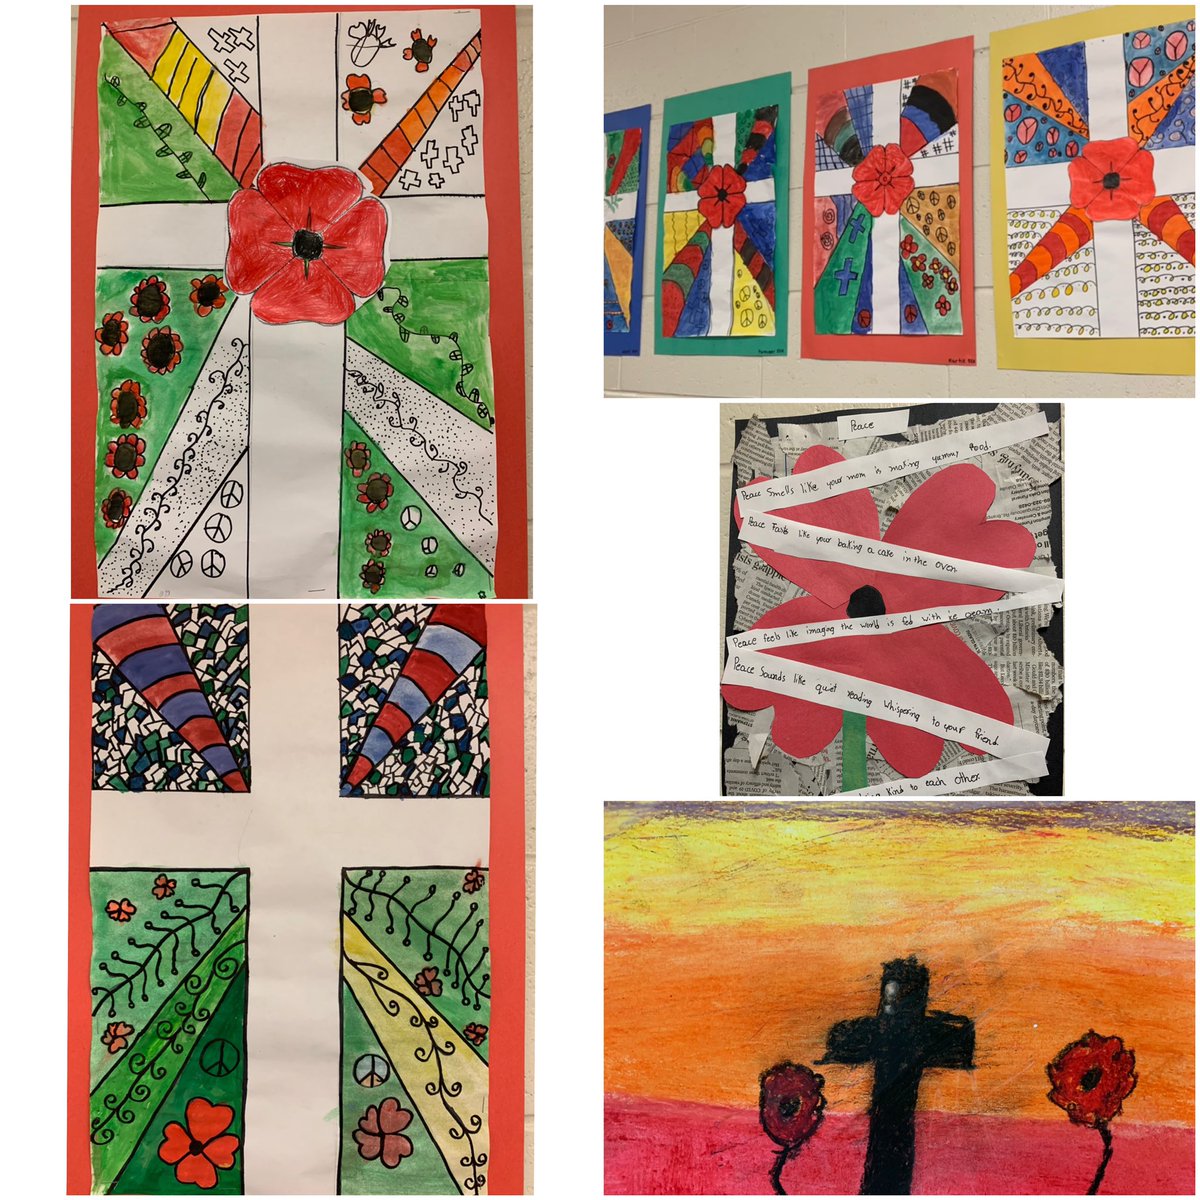 More thoughtful art pieces by our students for #RemembranceDay2021 
#PeelRemembers